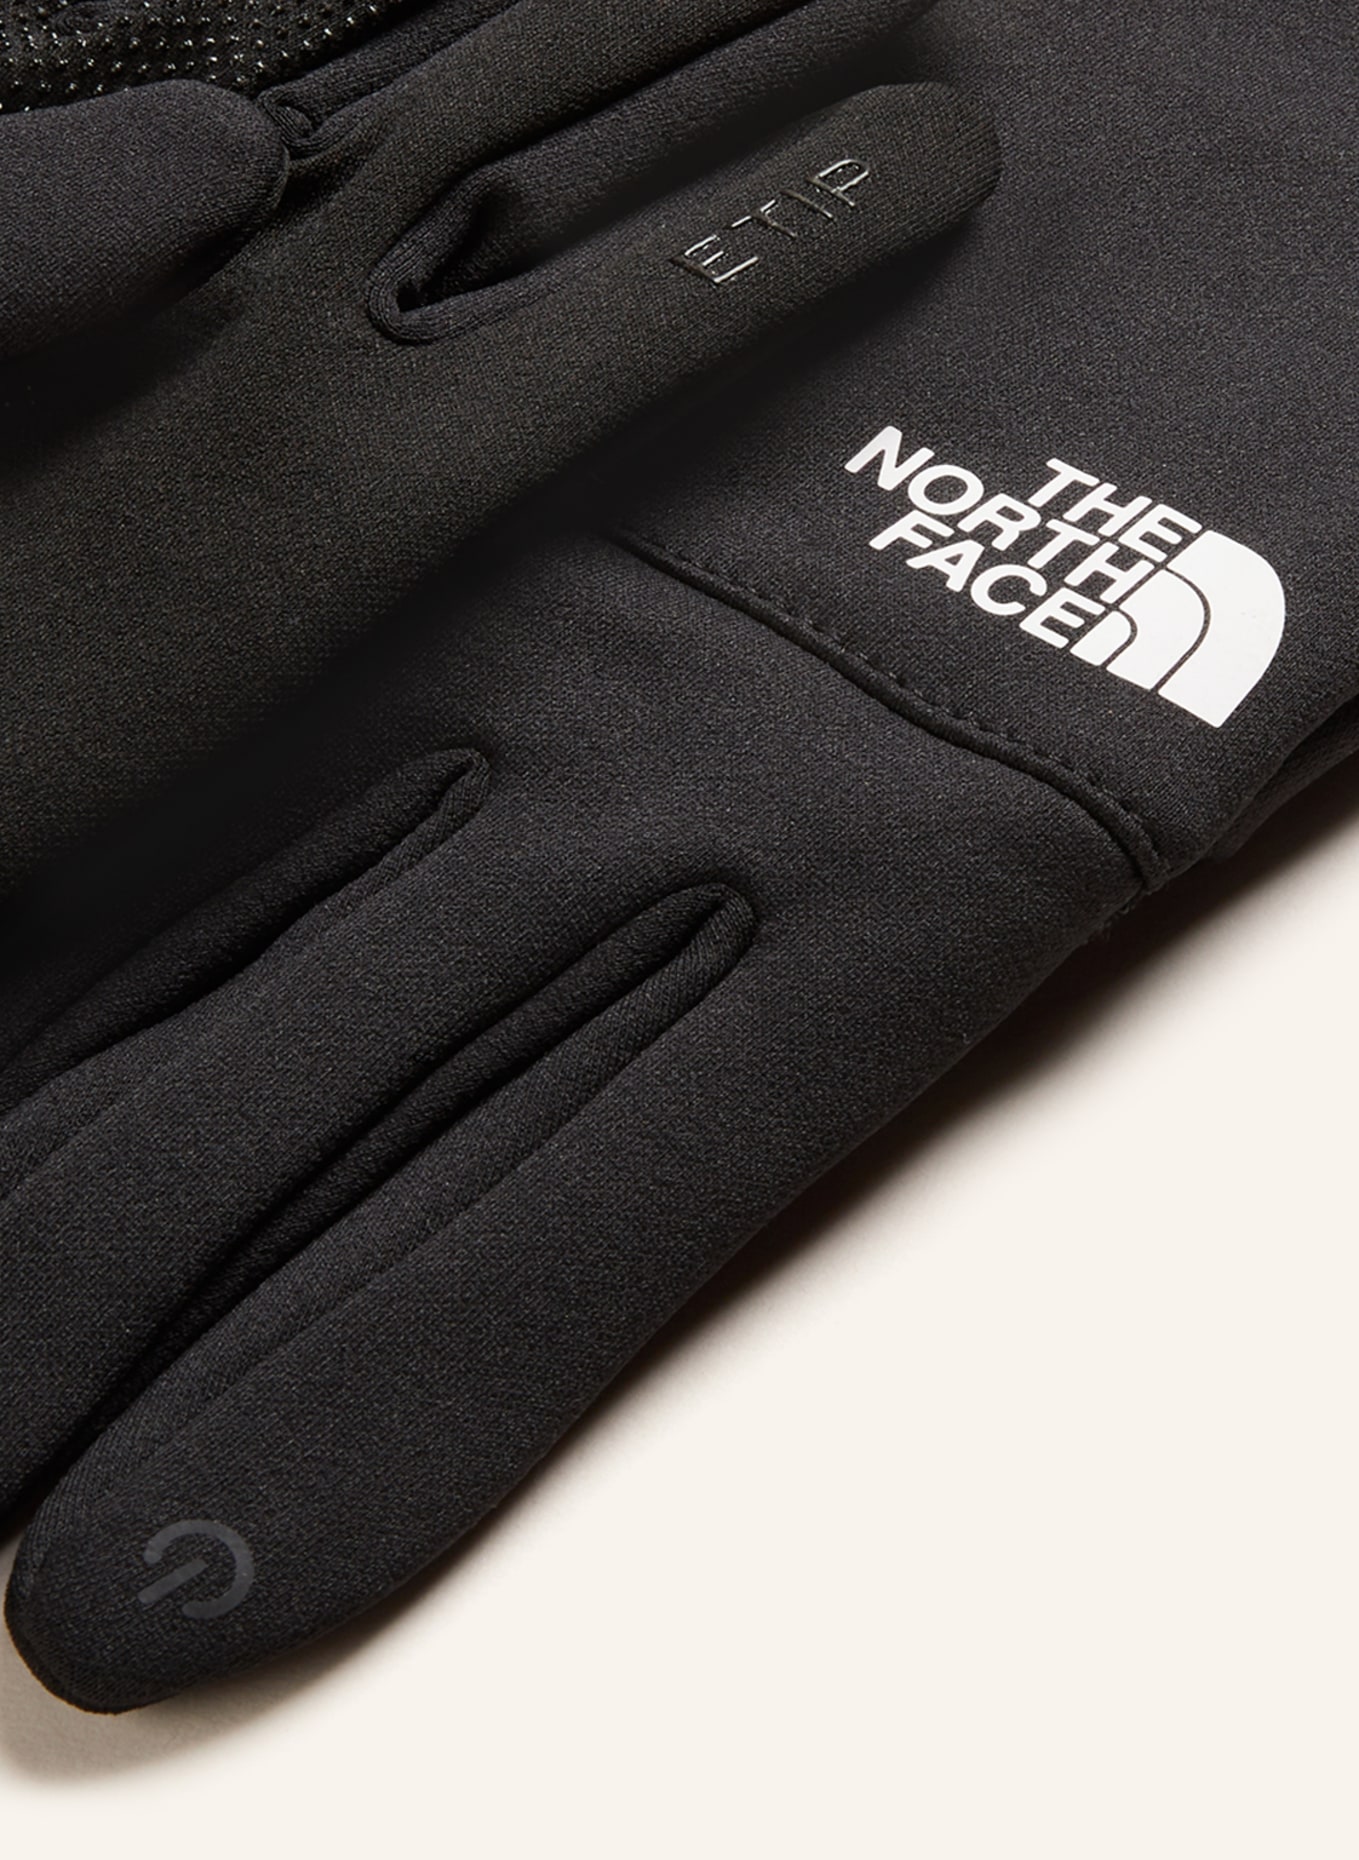 THE NORTH FACE Multisport gloves ETIP with touchscreen function in black/  white